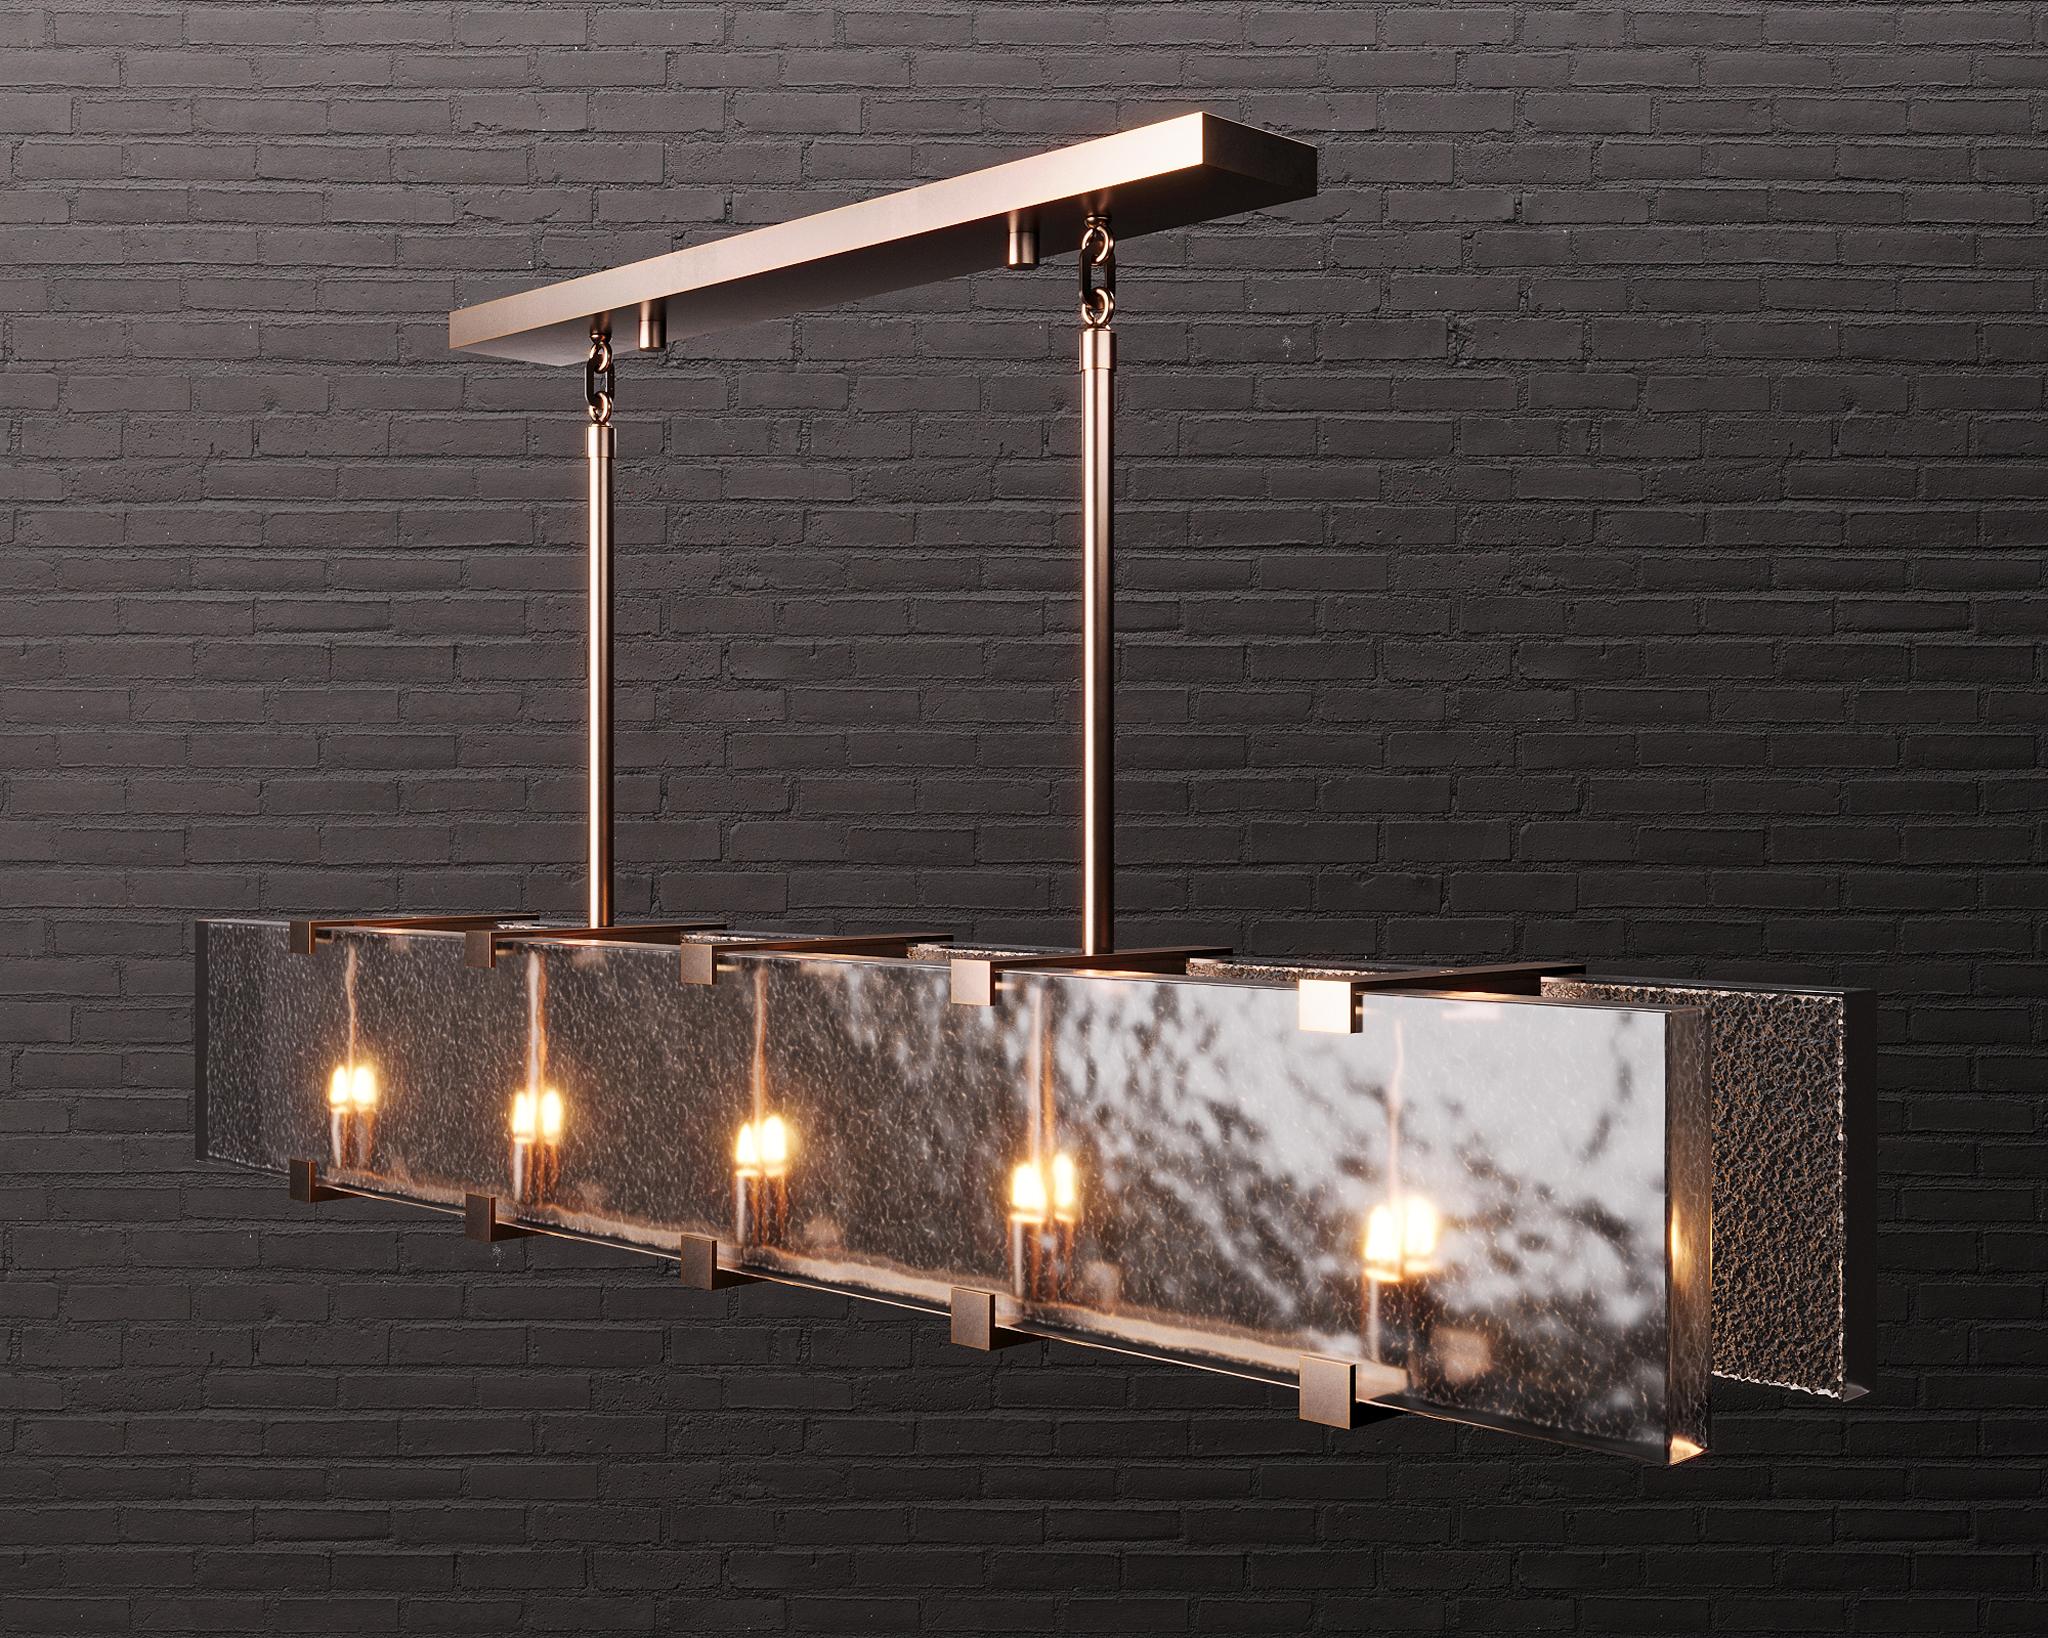 Single-cast textured glass walls glow with inner rows of light in a deceptively simple structured naturally beautiful bronze bracket frame with custom link detail.

Models in the collection are individually hand-crafted by the skilled artisans in